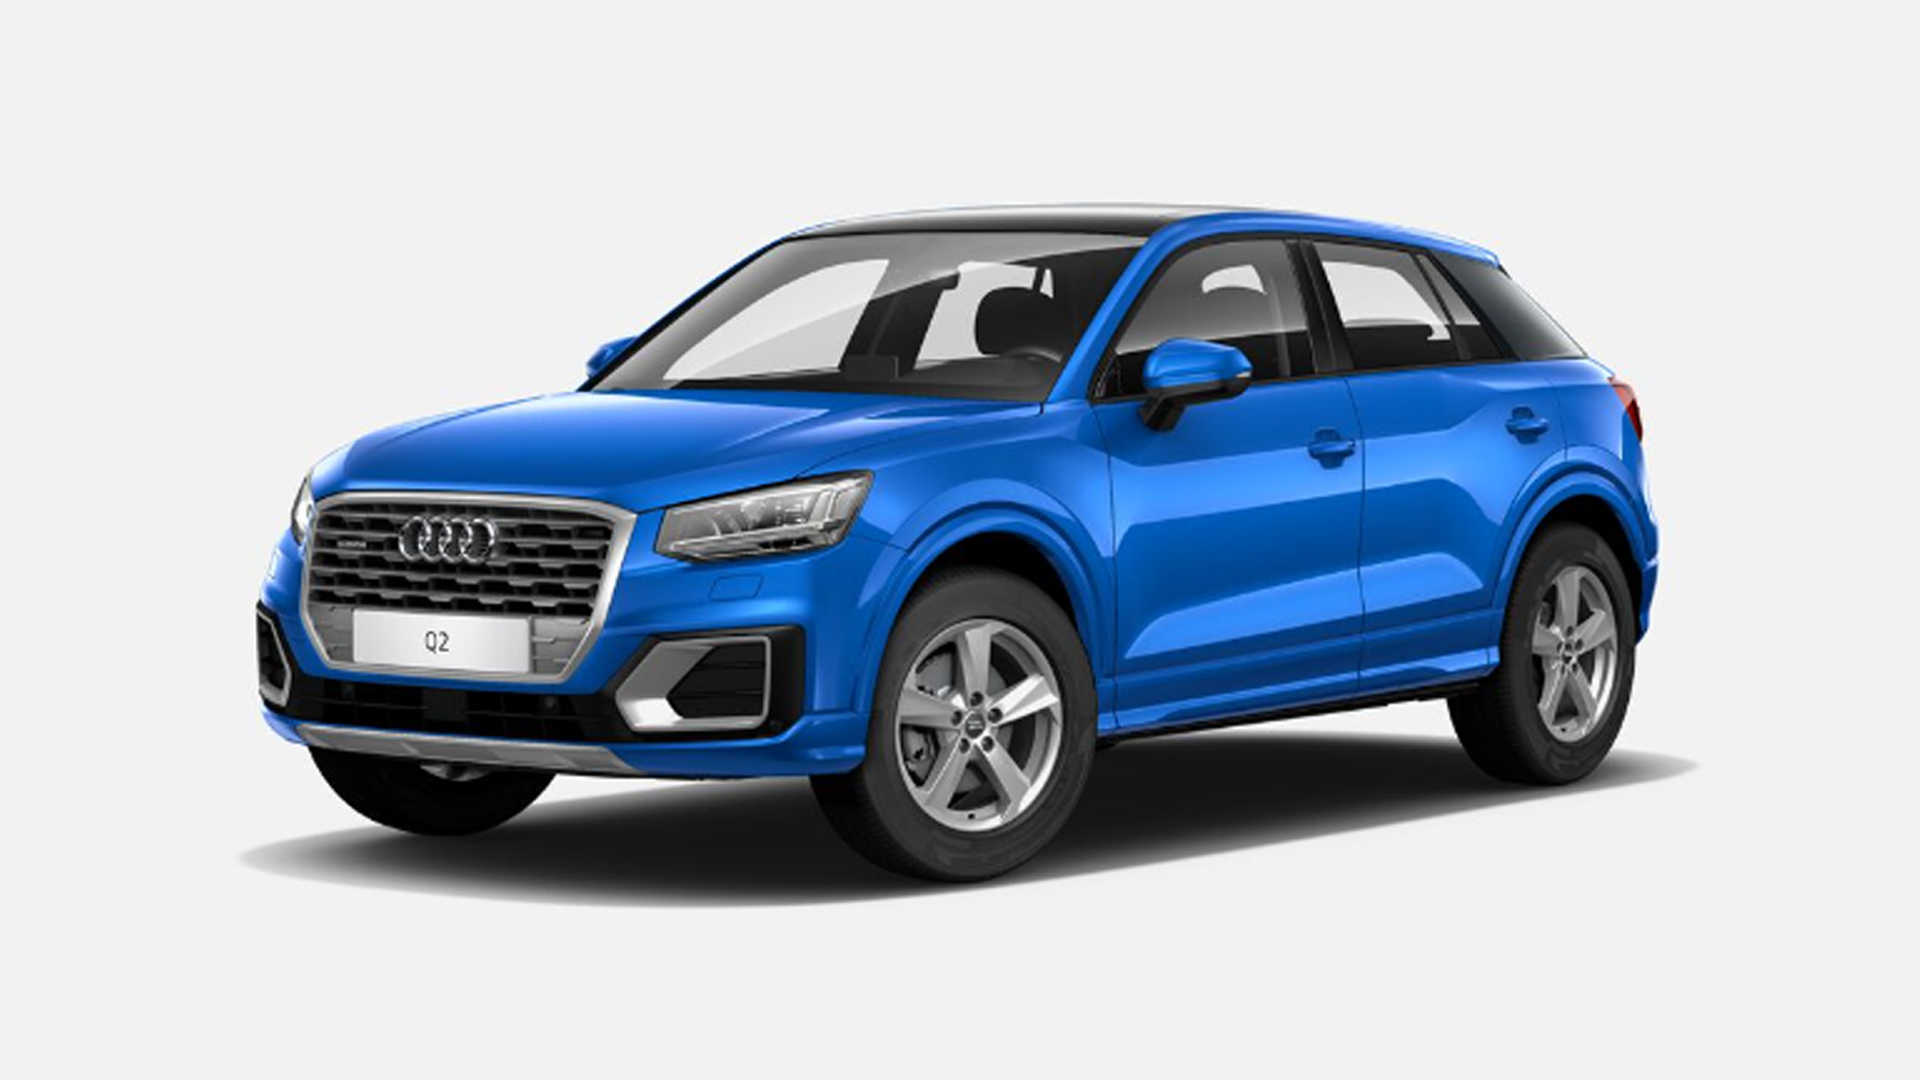 33 Best Audi q2 exterior Trend in This Years